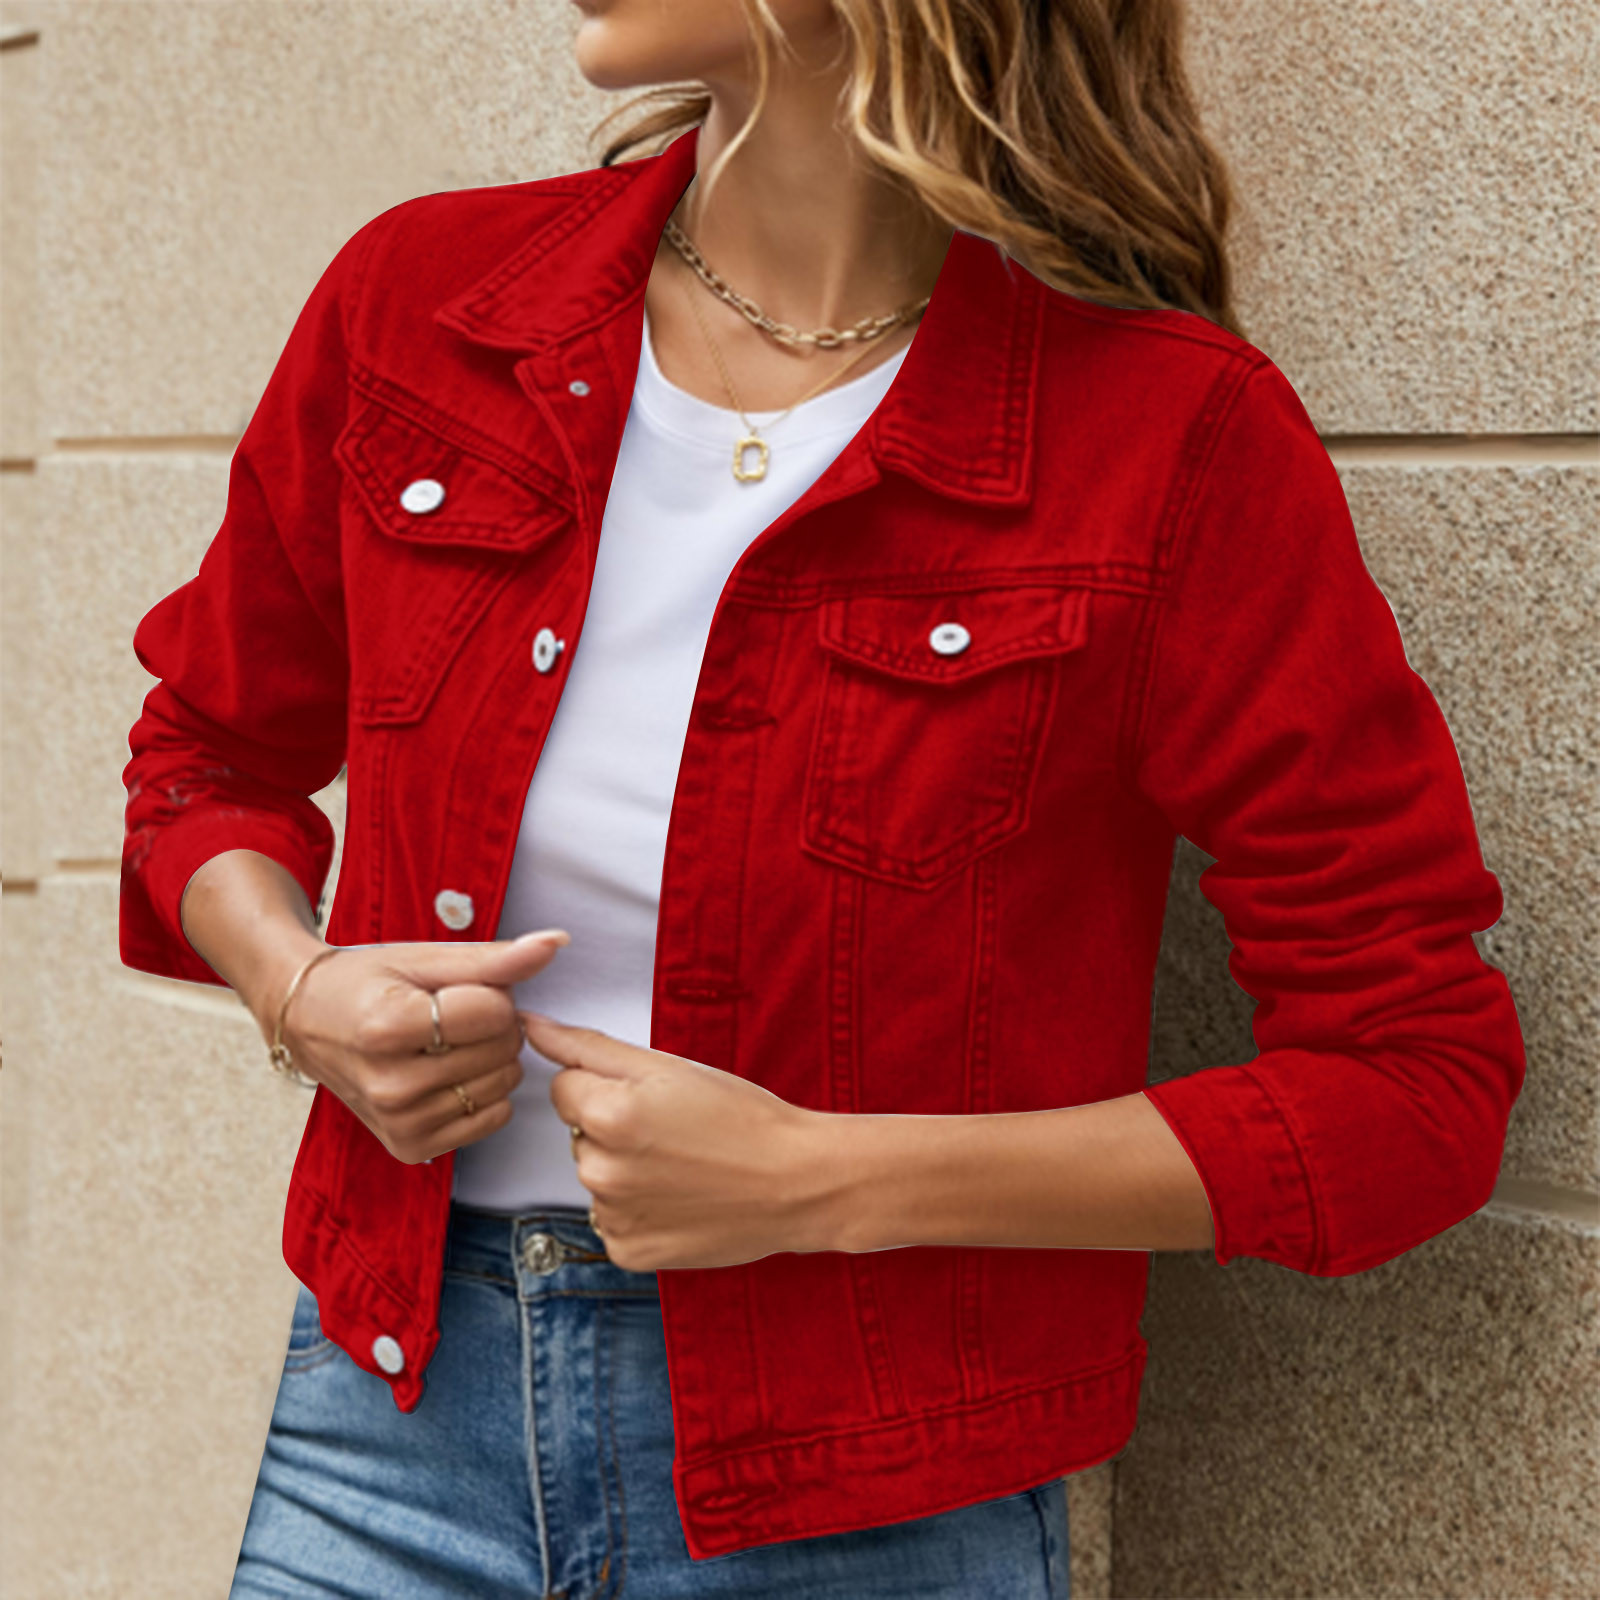 iOPQO womens sweaters Women's Basic Solid Color Button Down Denim Cotton Jacket With Pockets Denim Jacket Coat Women's Denim Jackets Red L - image 2 of 8